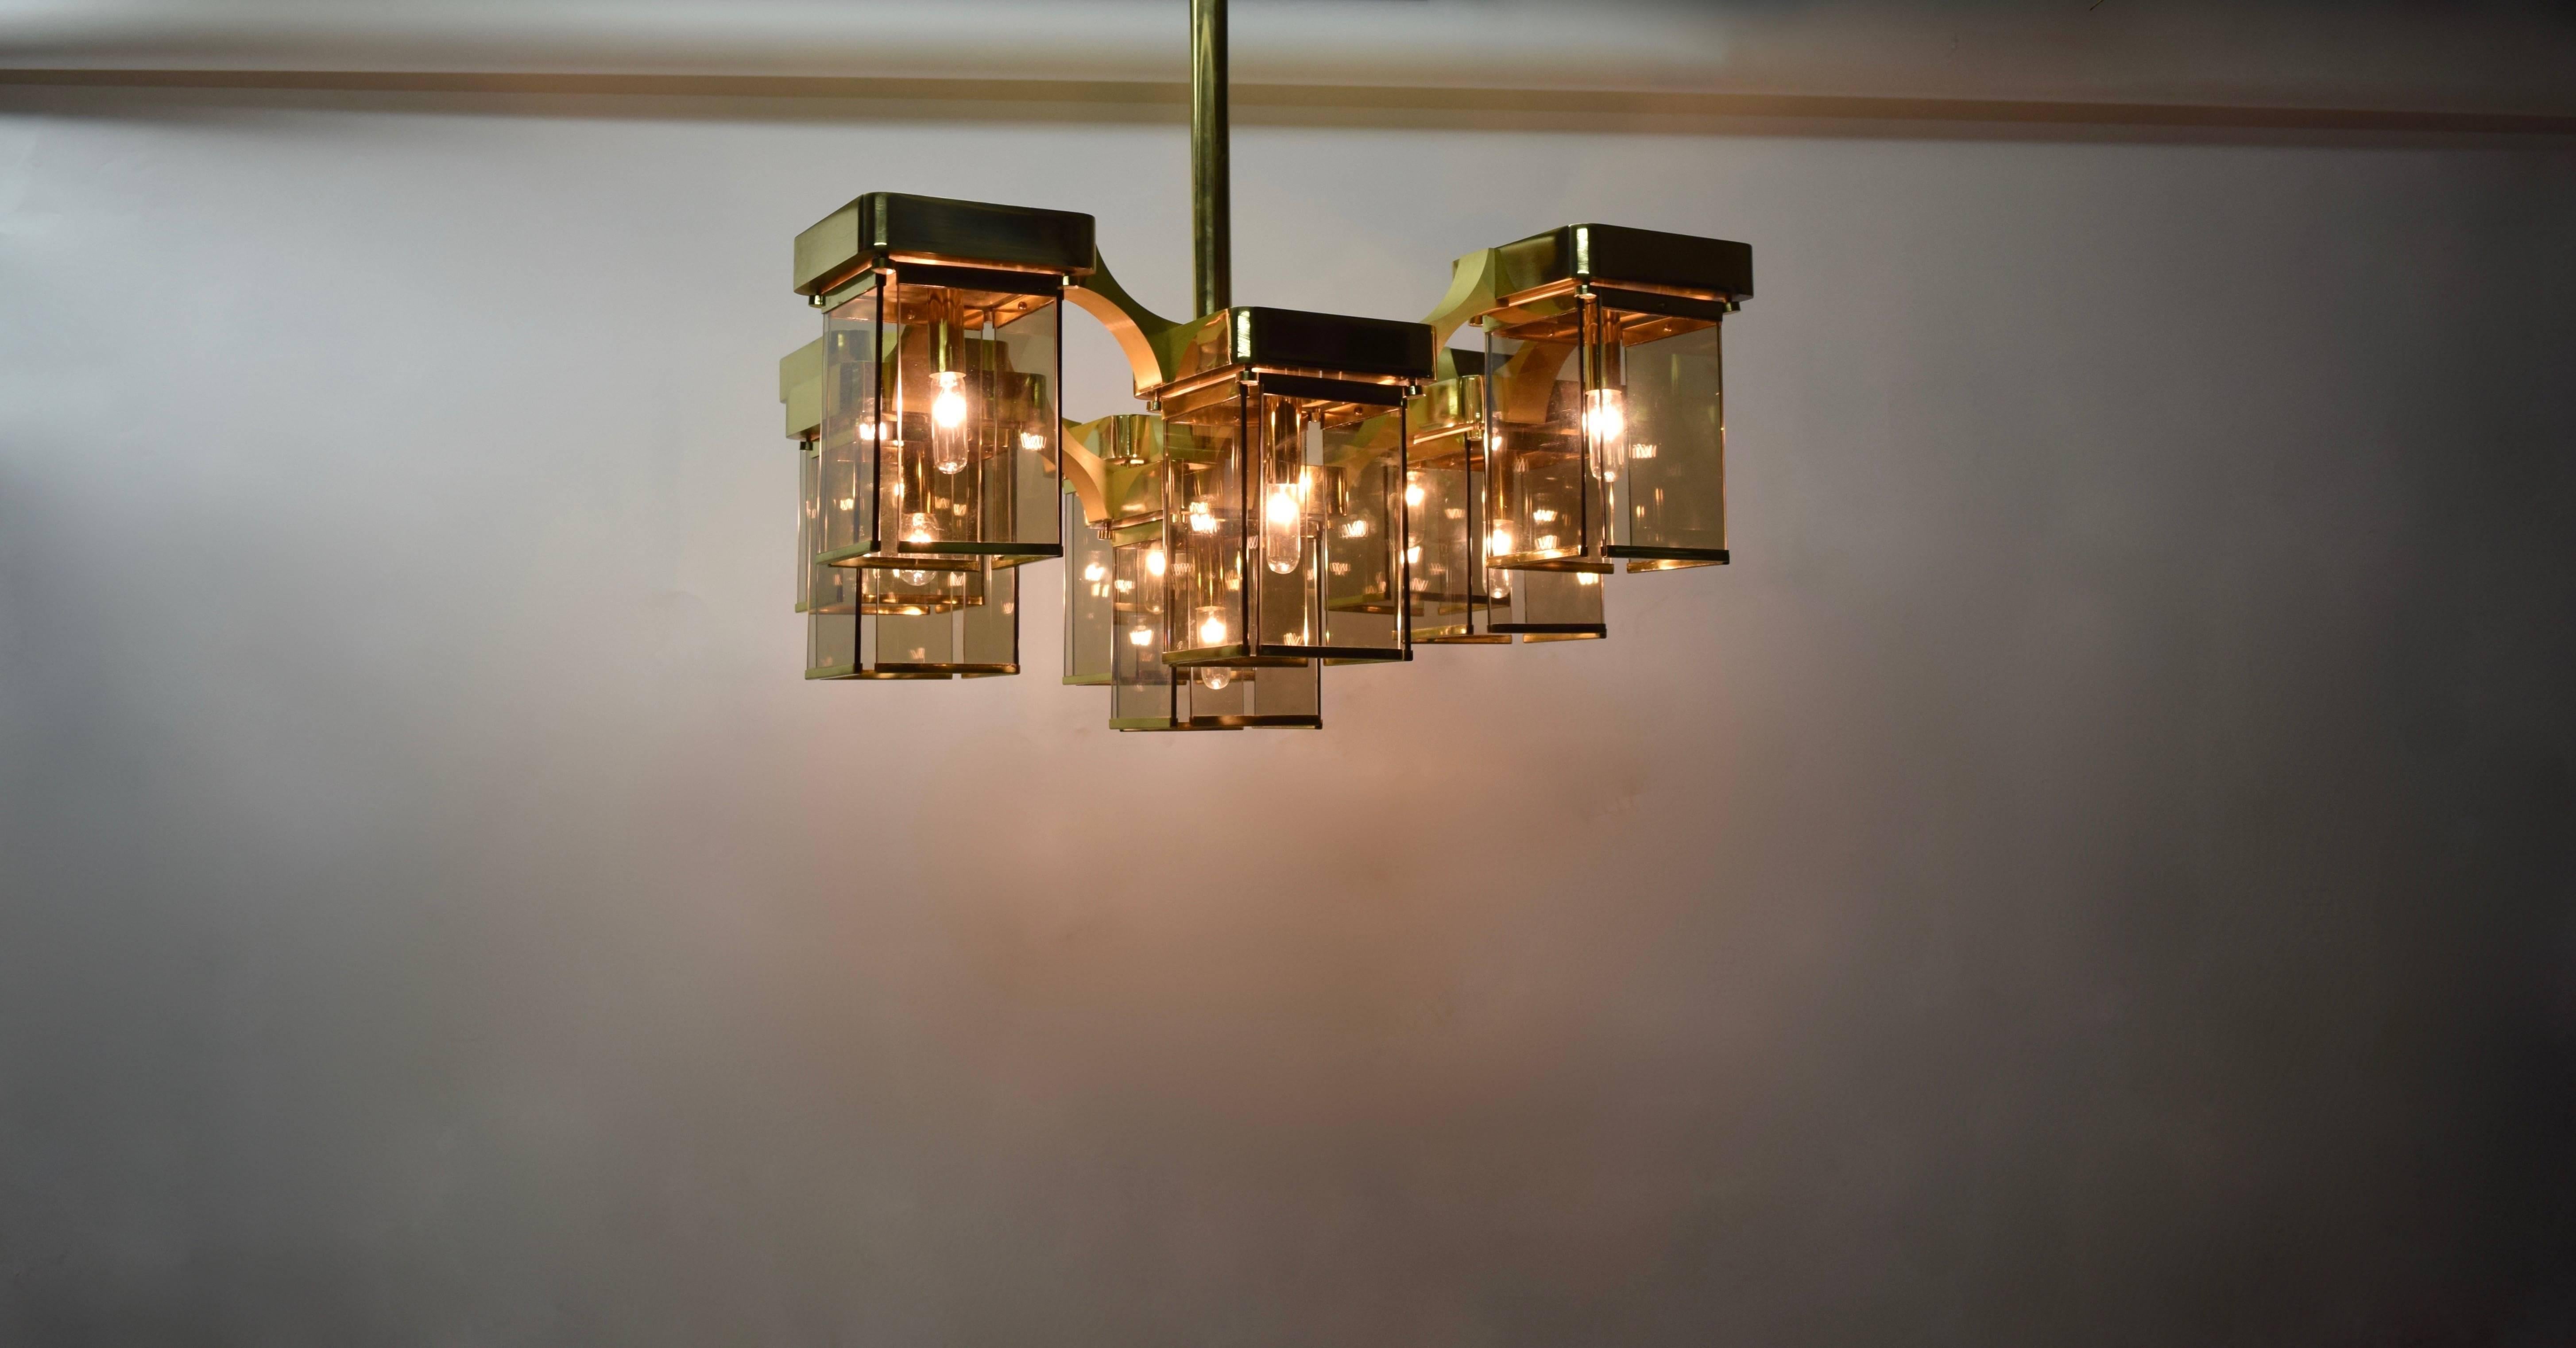 Brass and Smoked Glass Ceiling Fixture with 9 Lights by Sciolari, Italy 1960s For Sale 3